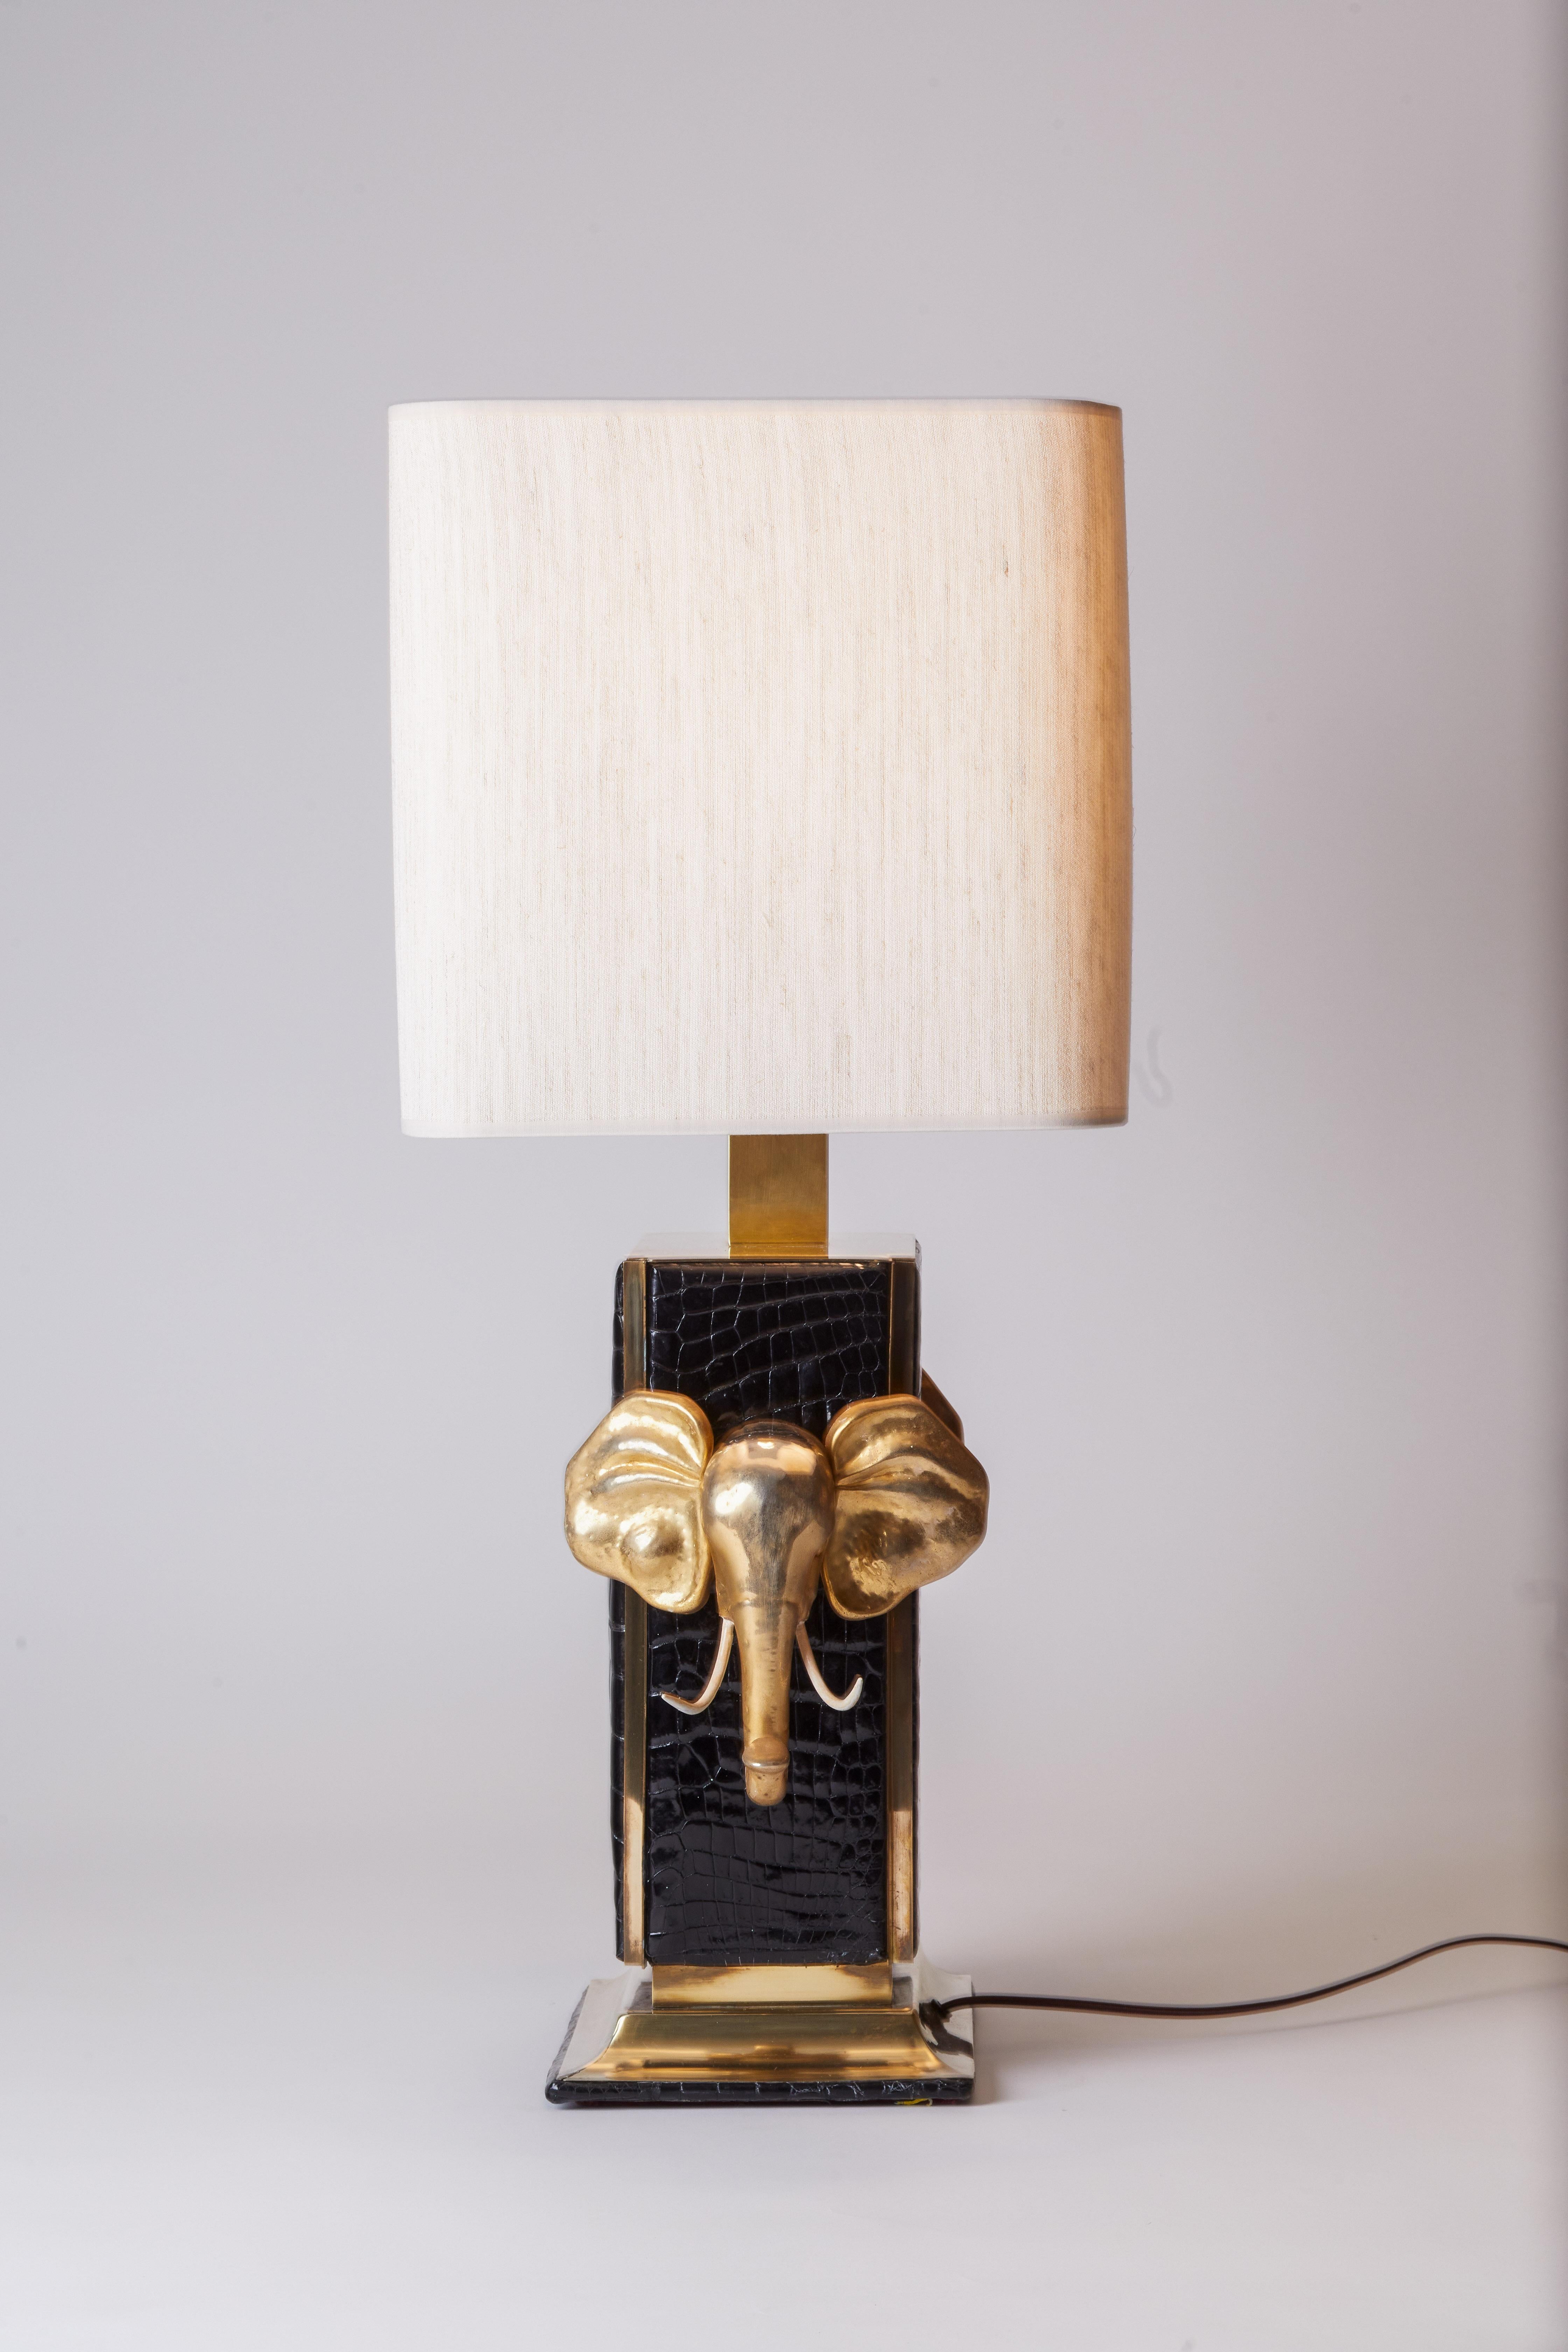 Unique 1980s Italian black crocodile covered brass lamp with elephant head detailing on either side. Brass base and custom lampshade. Excellent condition.